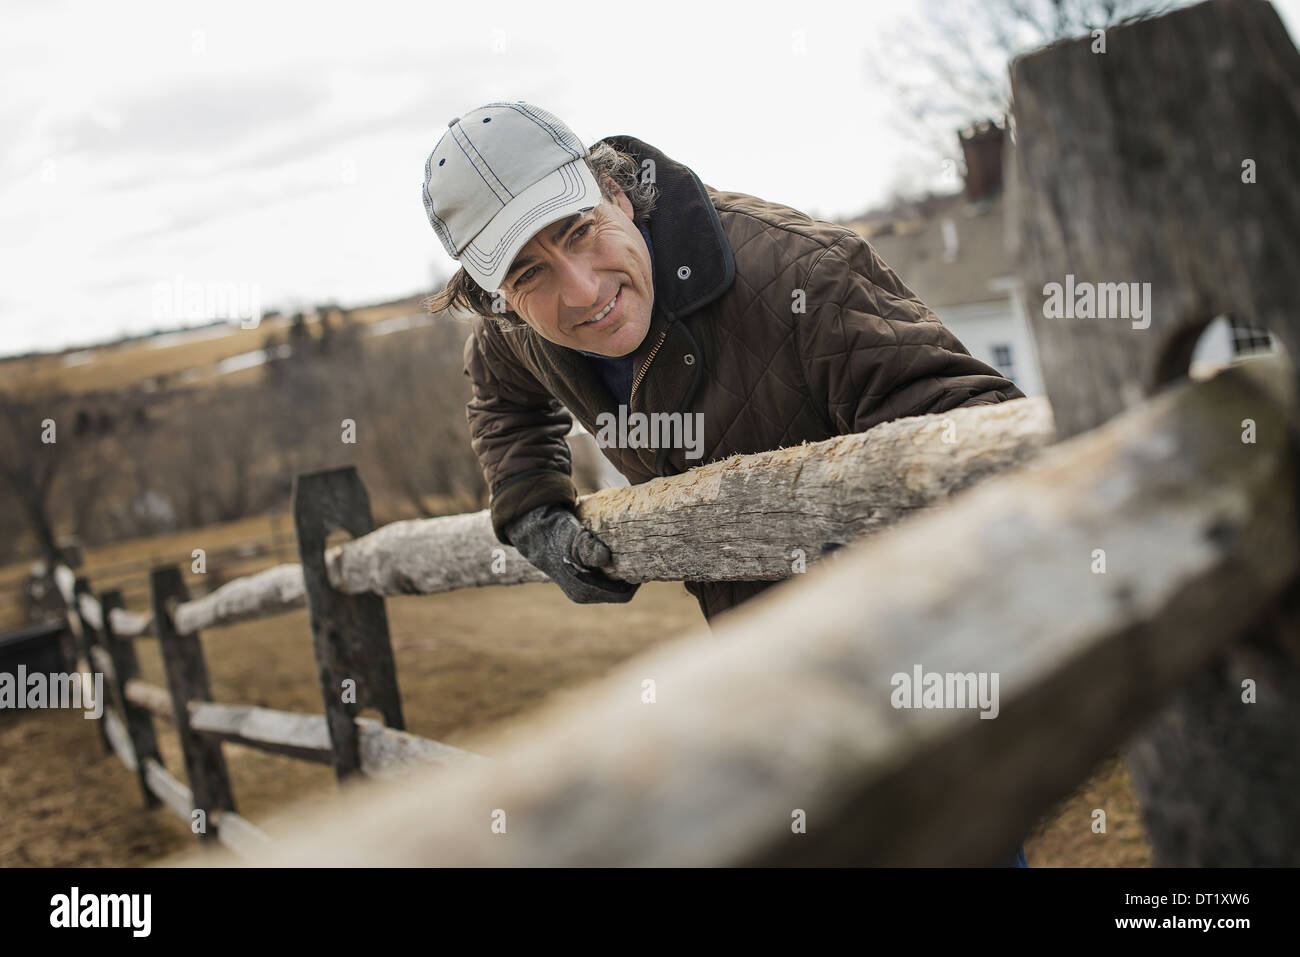 A man leaning against a post and rail fence on a farm in winter Stock Photo